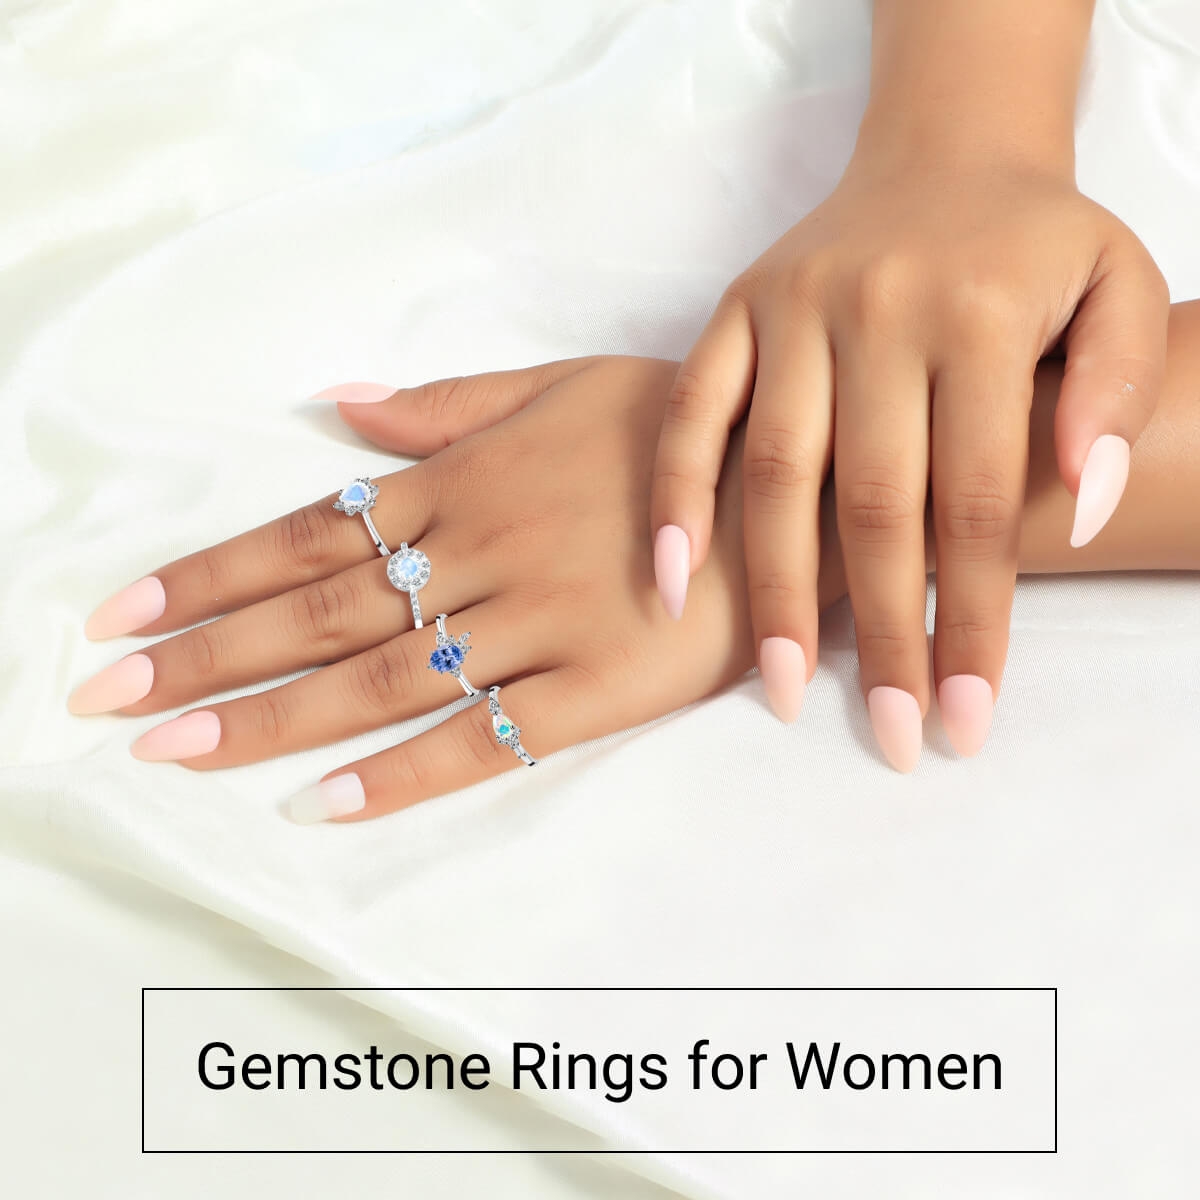 Gorgeous Gemstone Rings For Woman